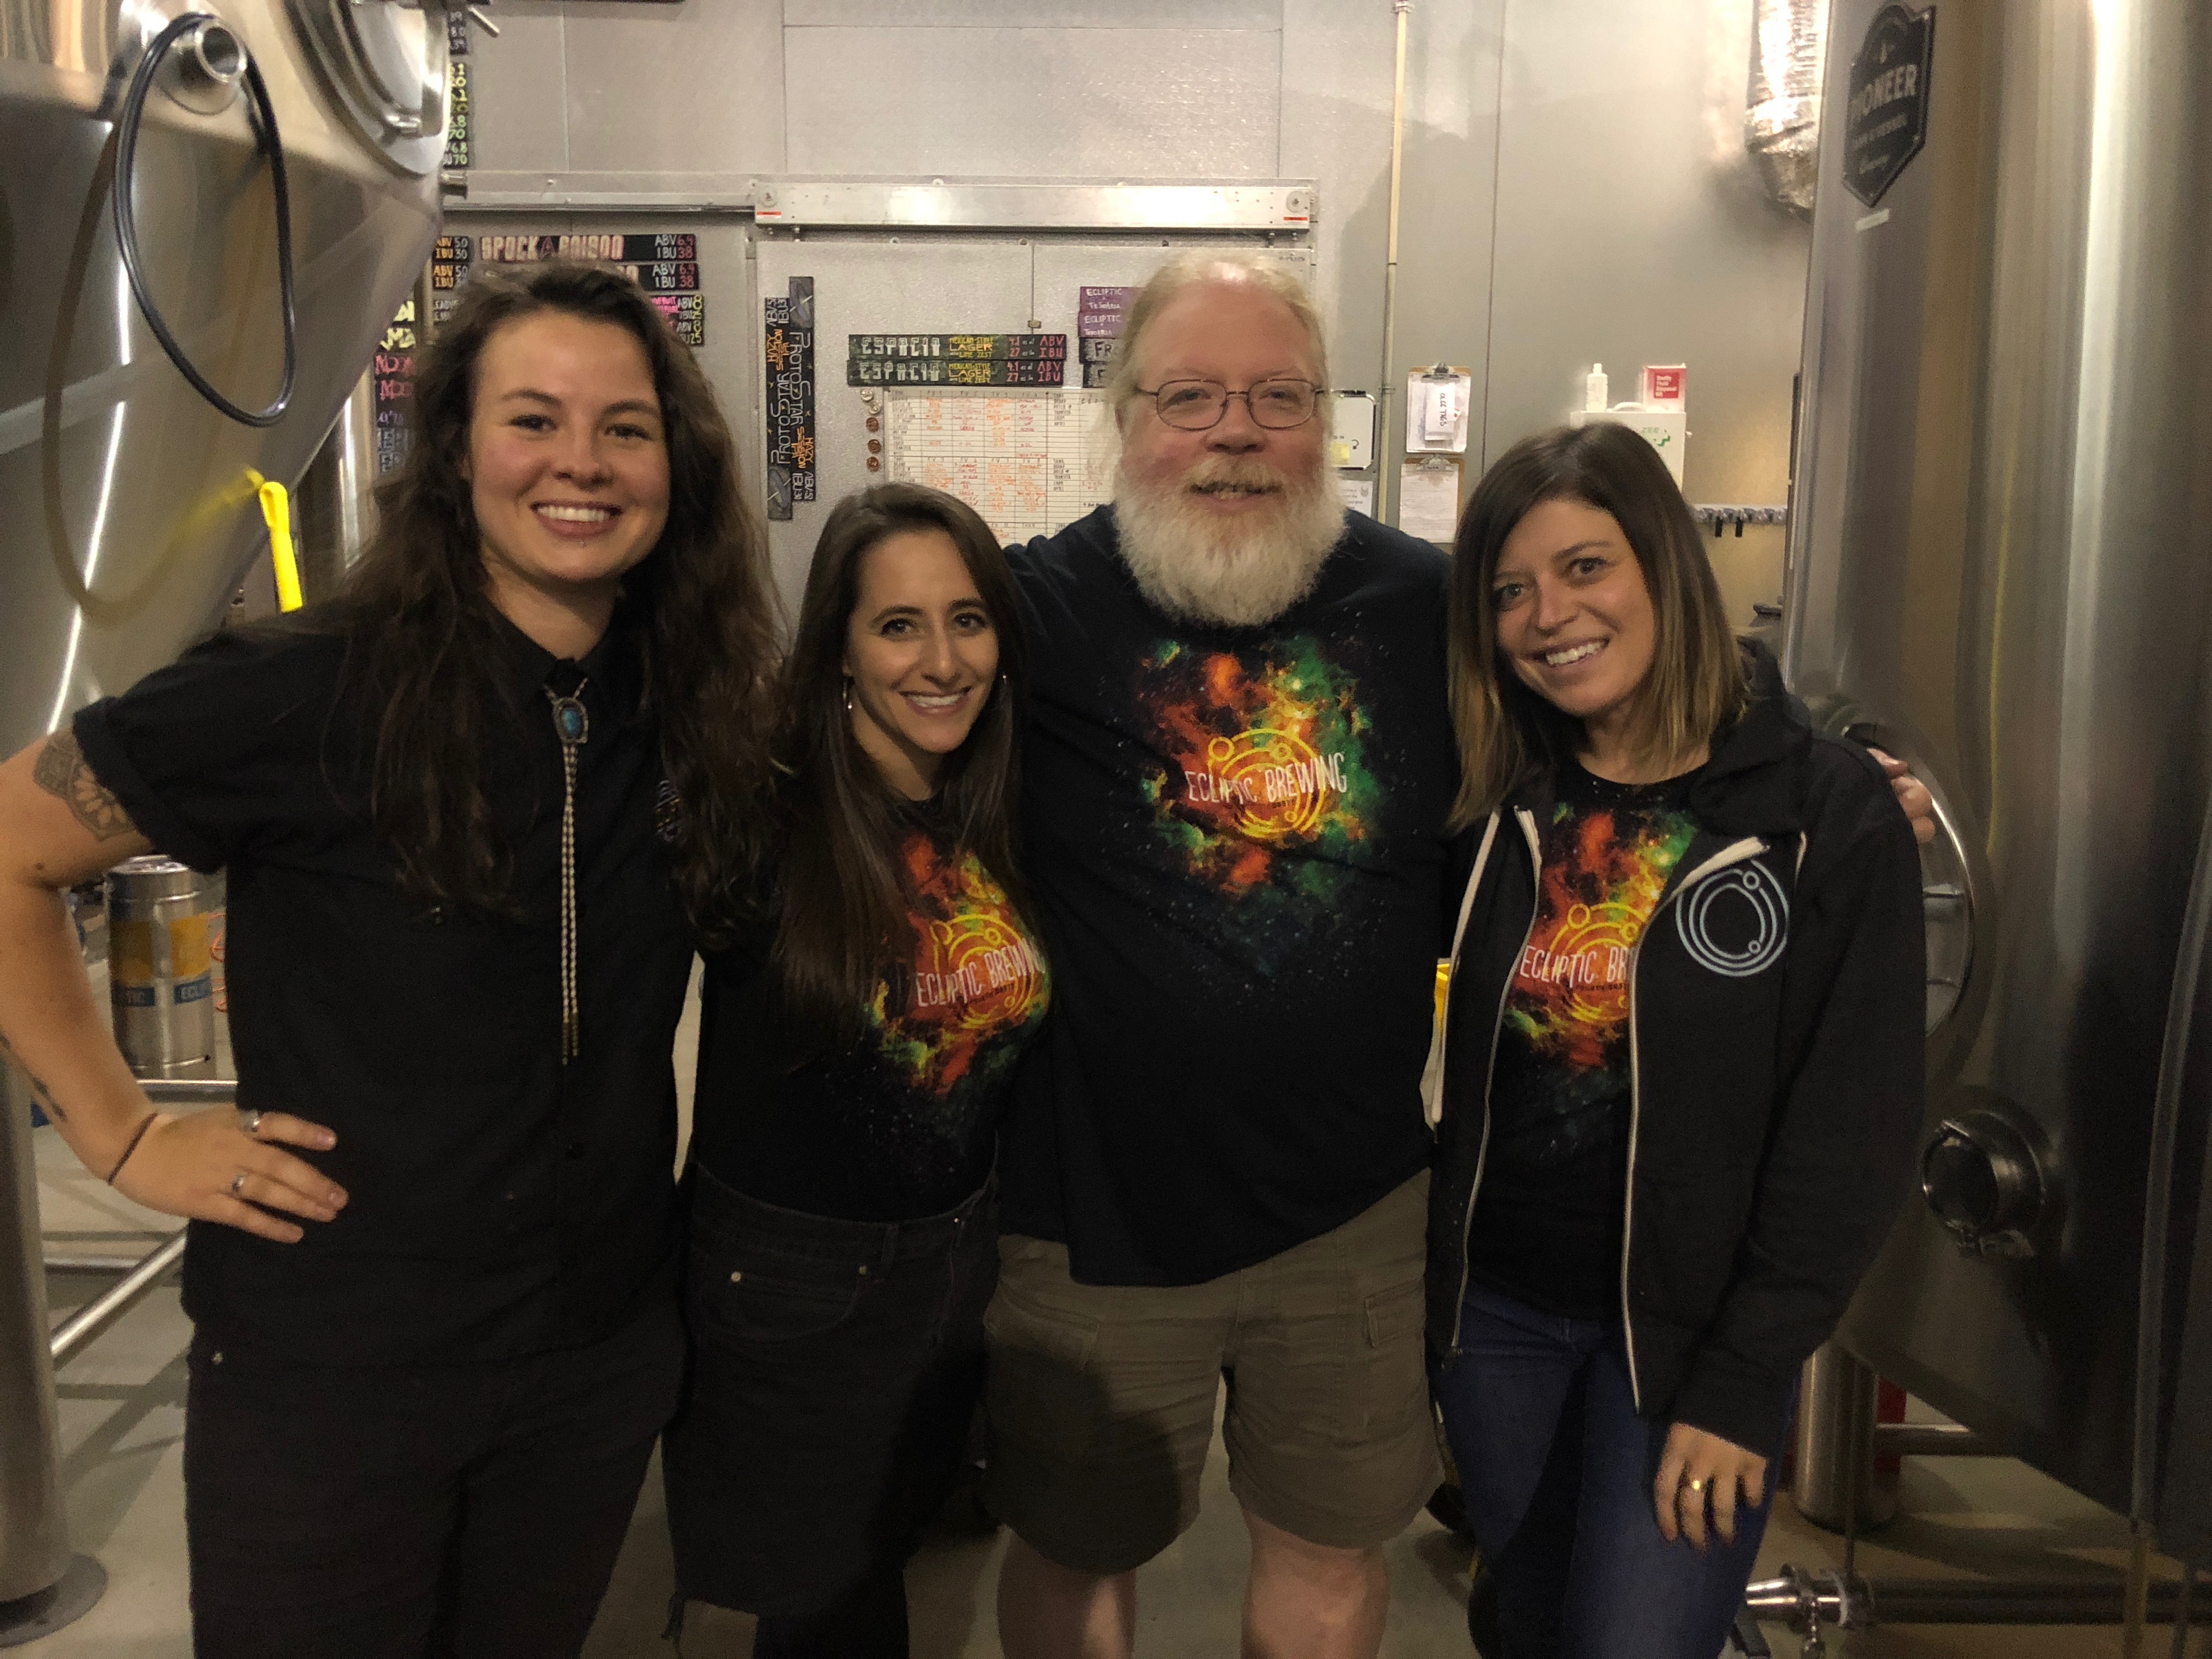 John Harris surrounded by the Eclipitc Brewing sales and marketing crew celebrating another orbit around the sun.